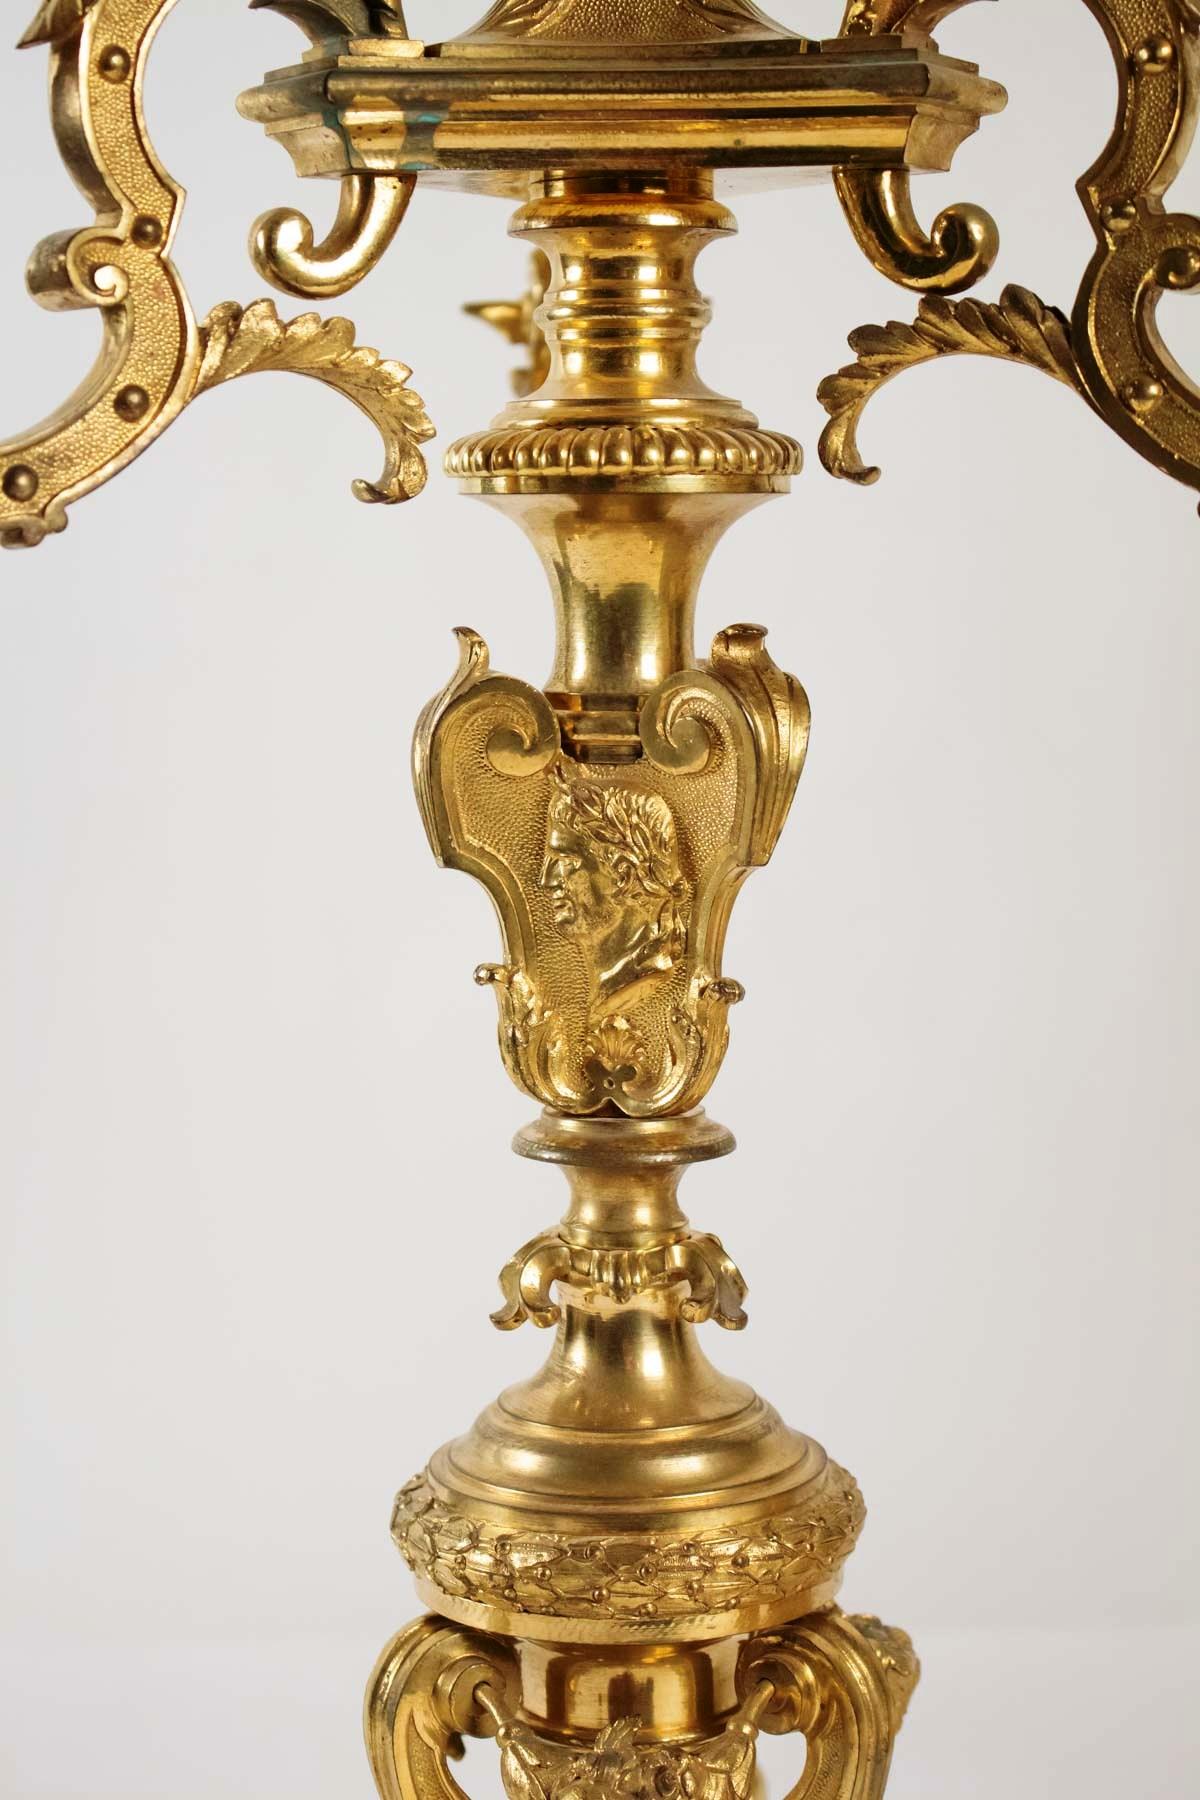 Rare Pair of Gilt Bronze Candelabras, after A-C Boulle France, Late 19th Century (Französisch)